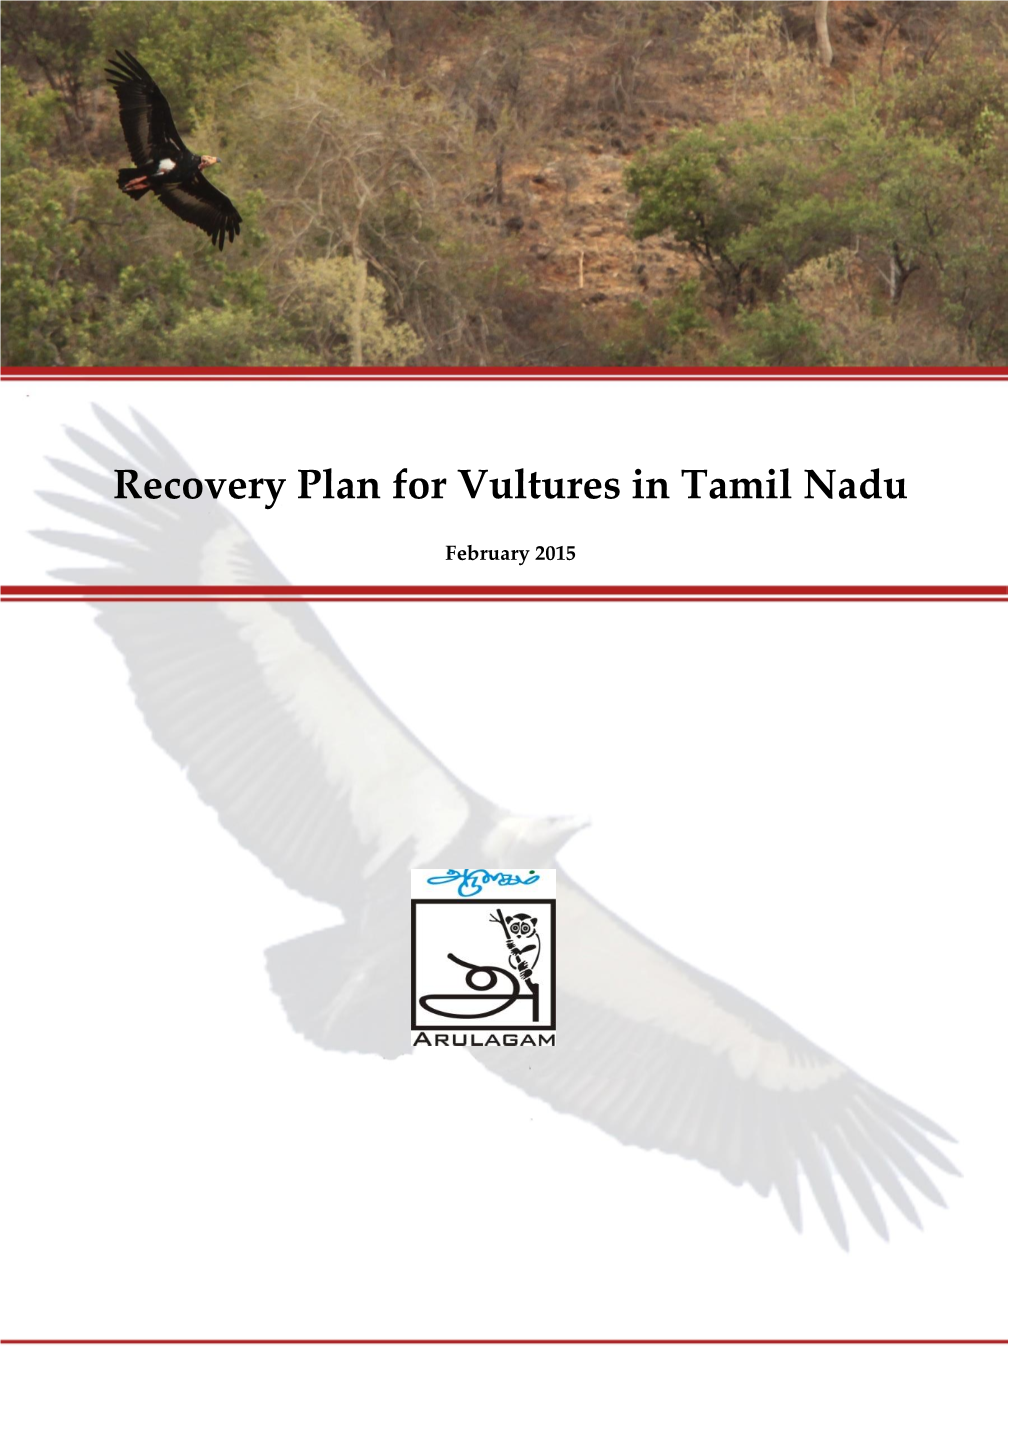 Recovery Plan for Vultures in Tamil Nadu English Pdf 1.32 MB